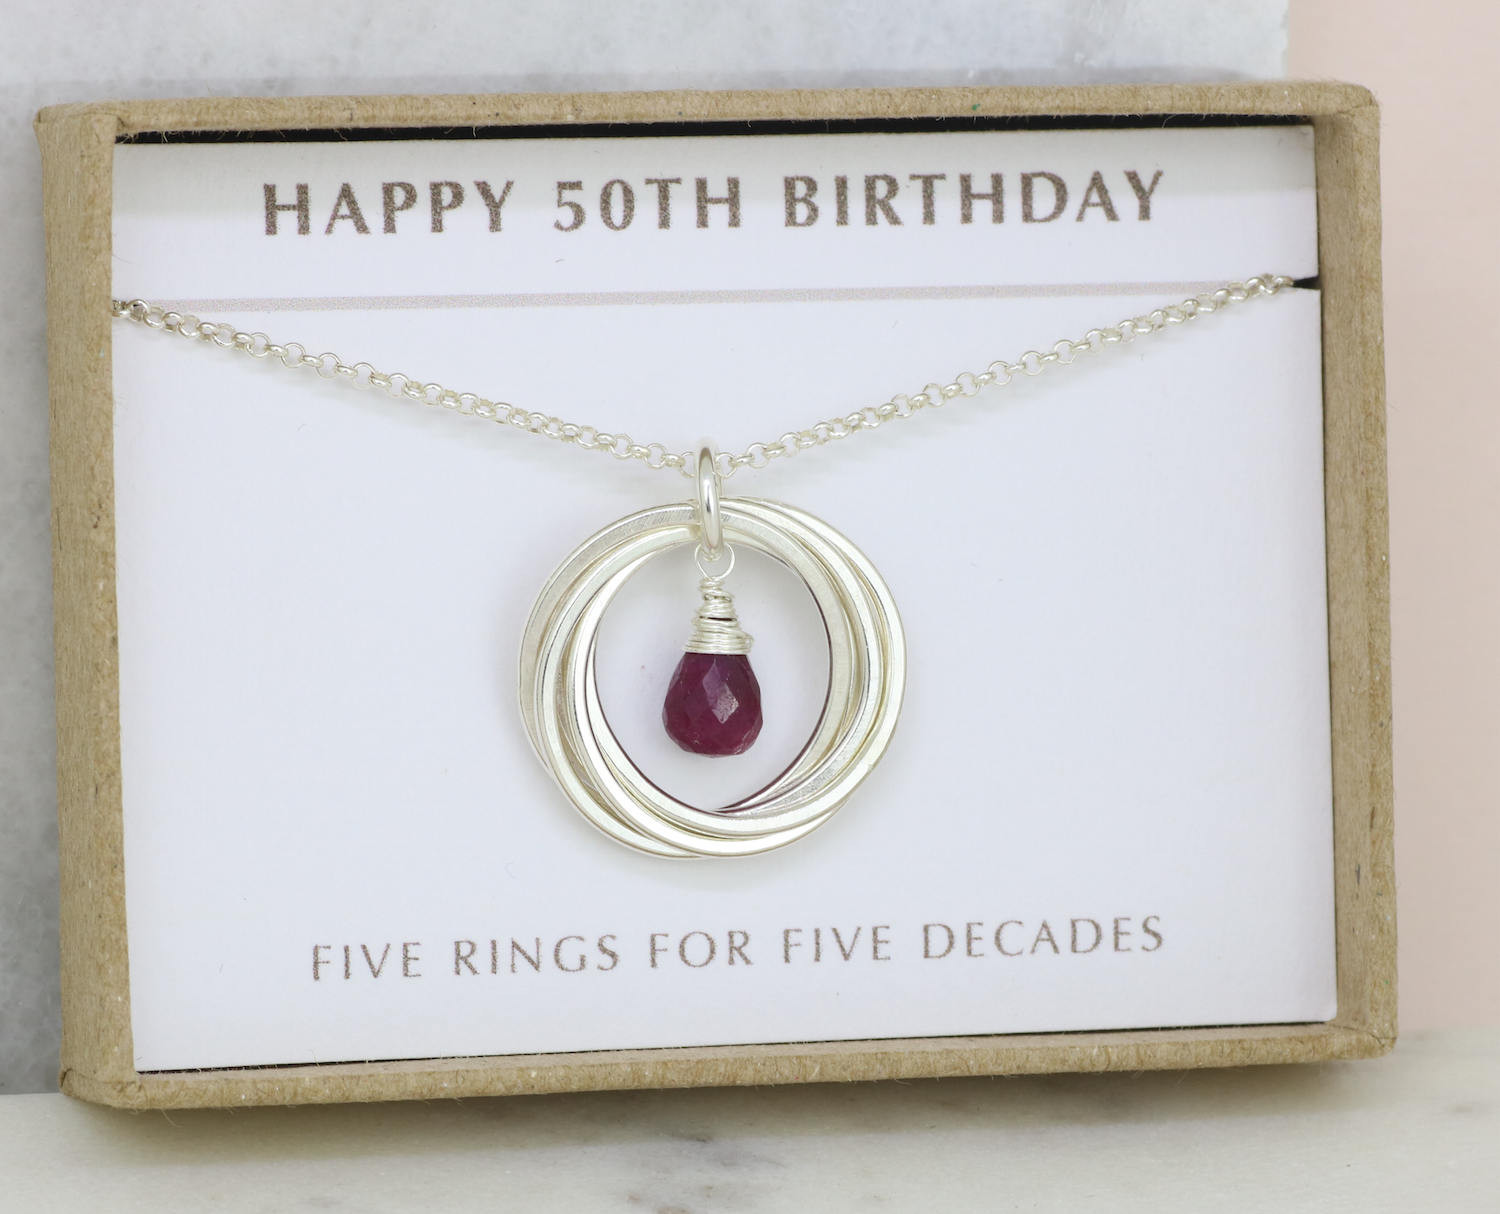 The 20 Best Ideas for 50th Birthday Gift Ideas for Wife – Home, Family ...